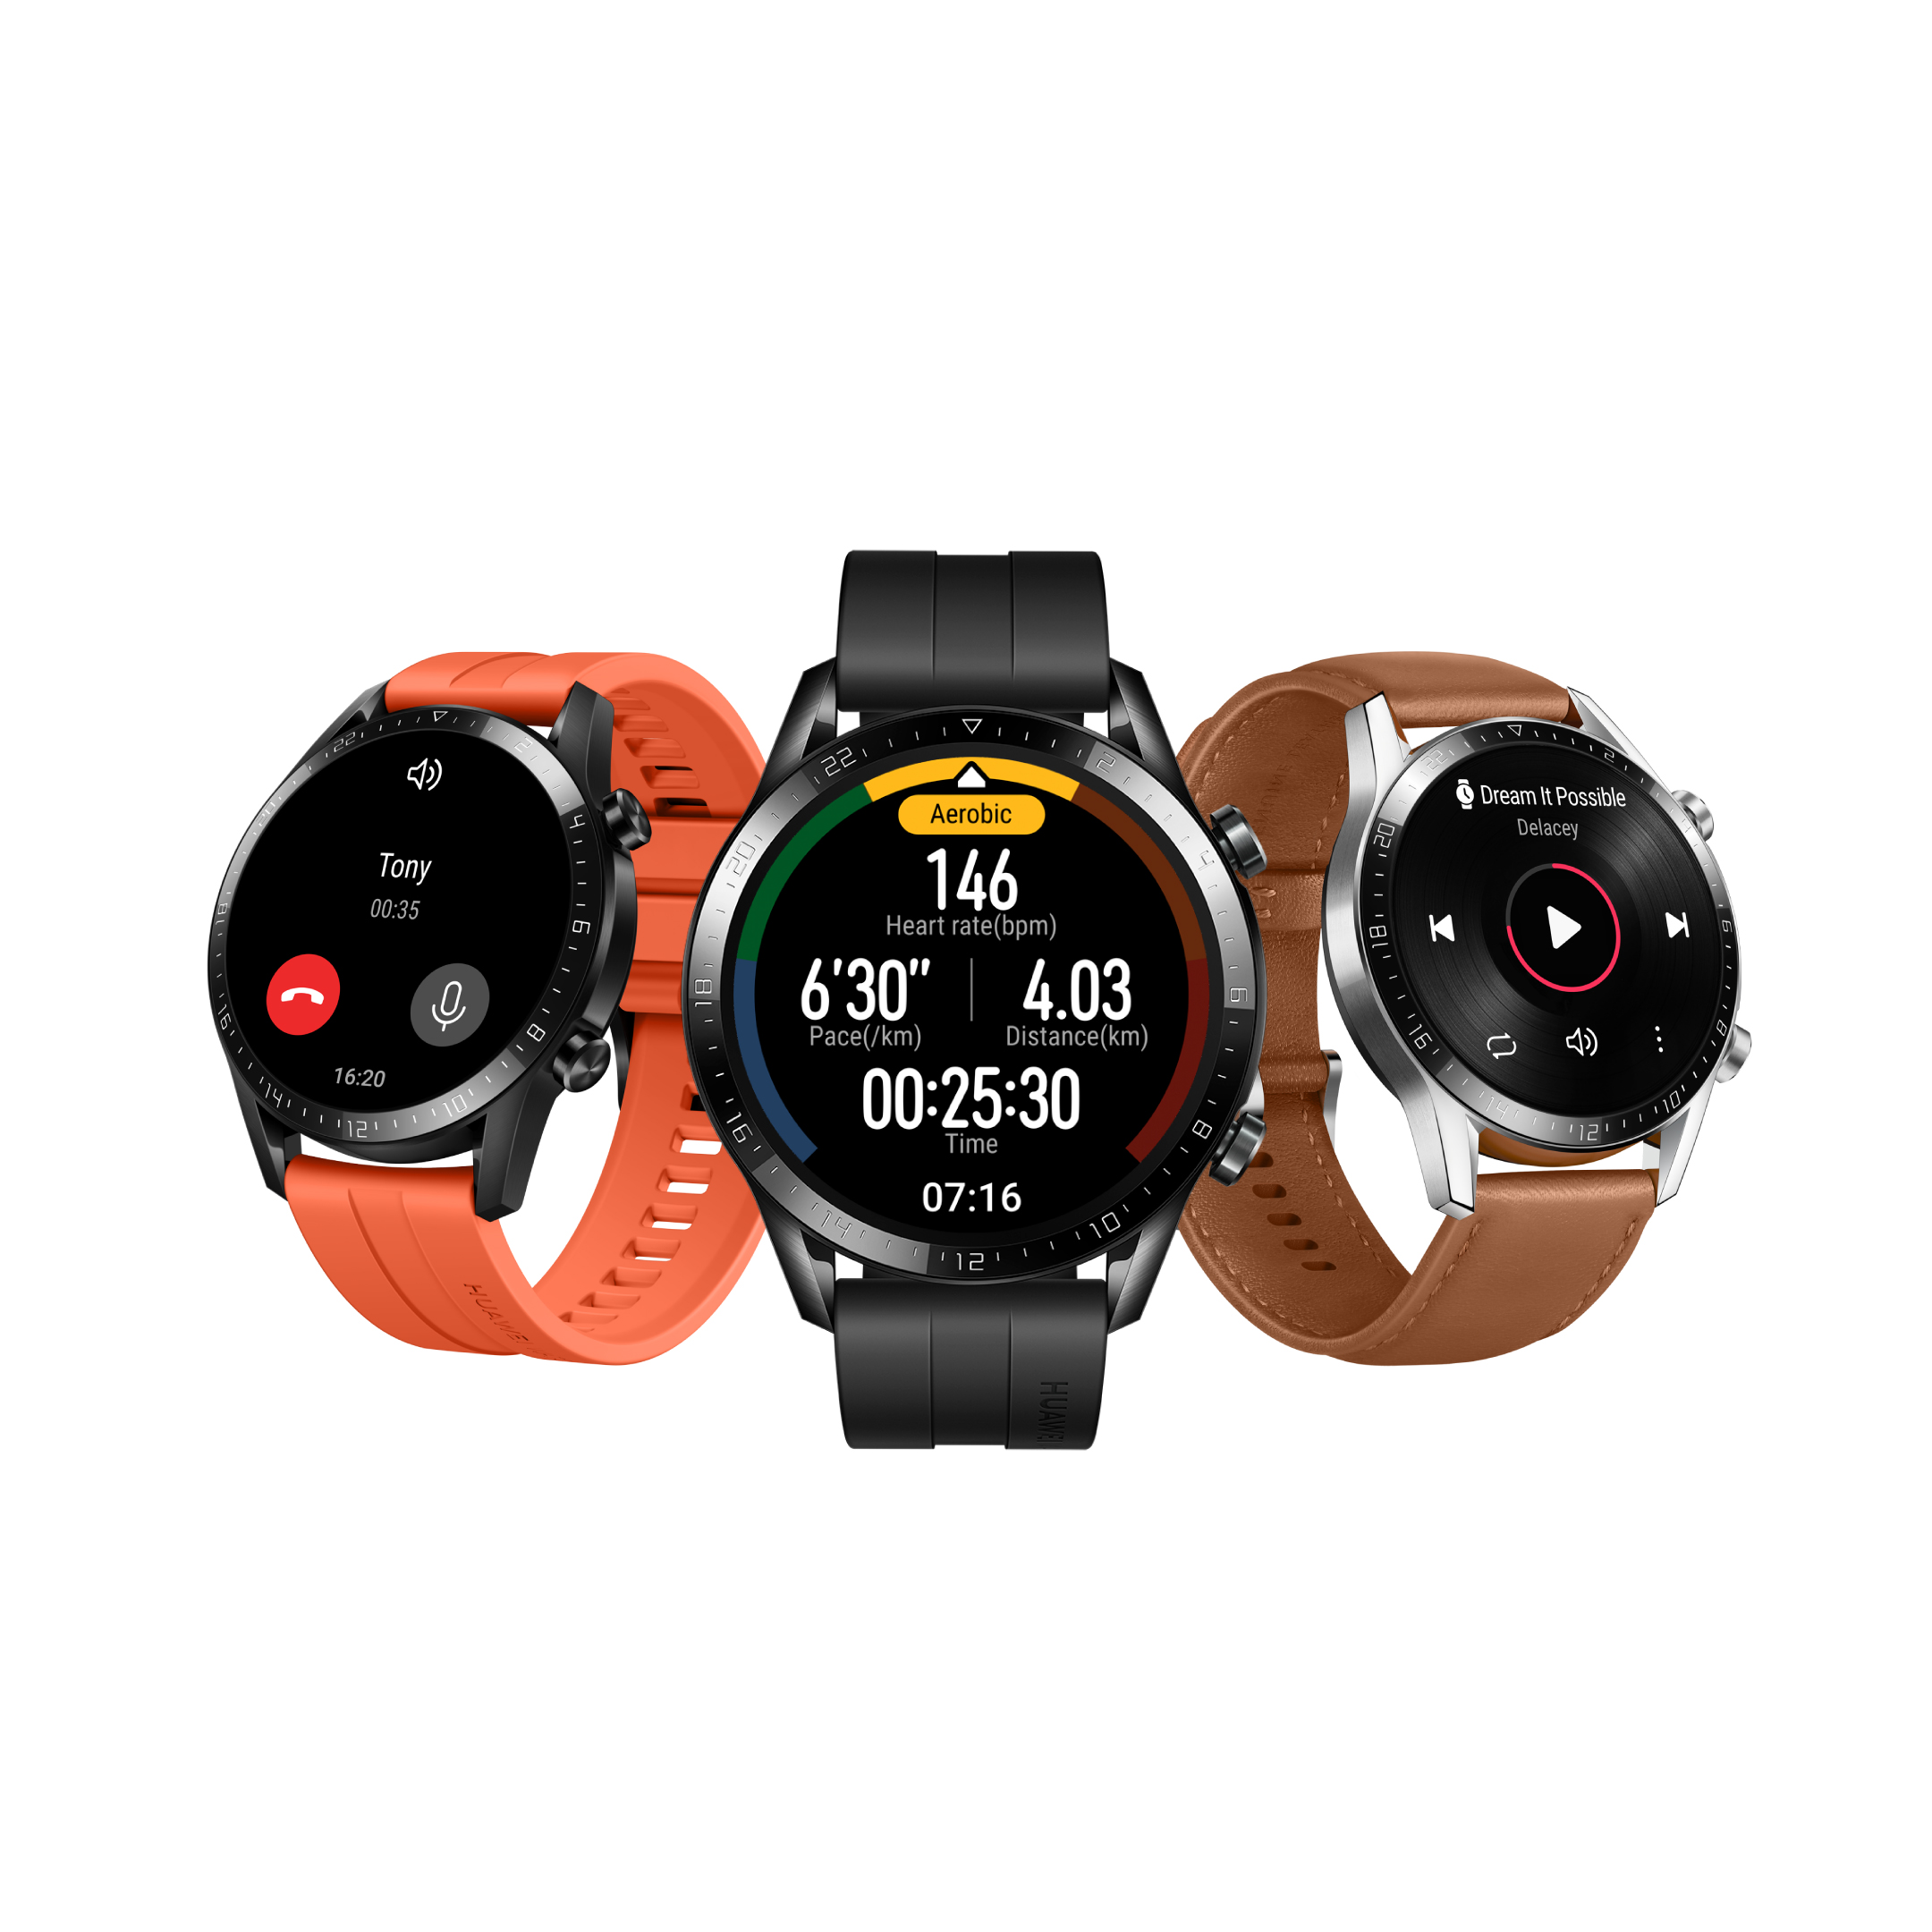 AN INTELLIGENT NEW TRAINER IN QATAR: HUAWEI WATCH GT 2 SERIES PROMISES TO PROVIDE PROFESSIONAL QUALITY TRAINING